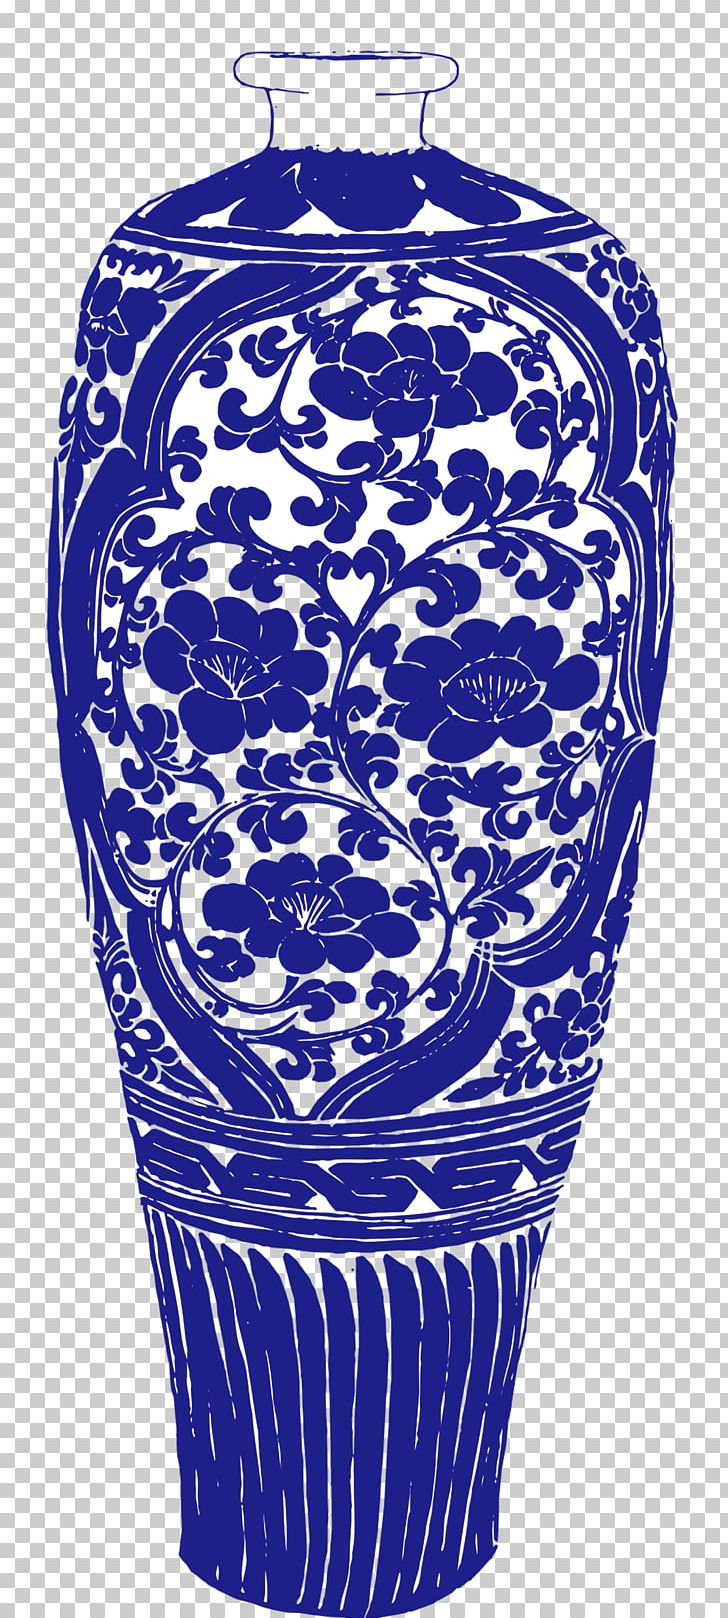 Blue And White Pottery Ceramic Porcelain Vase Motif PNG, Clipart, Art, Artifact, Black White, Blue, Blue Abstract Free PNG Download